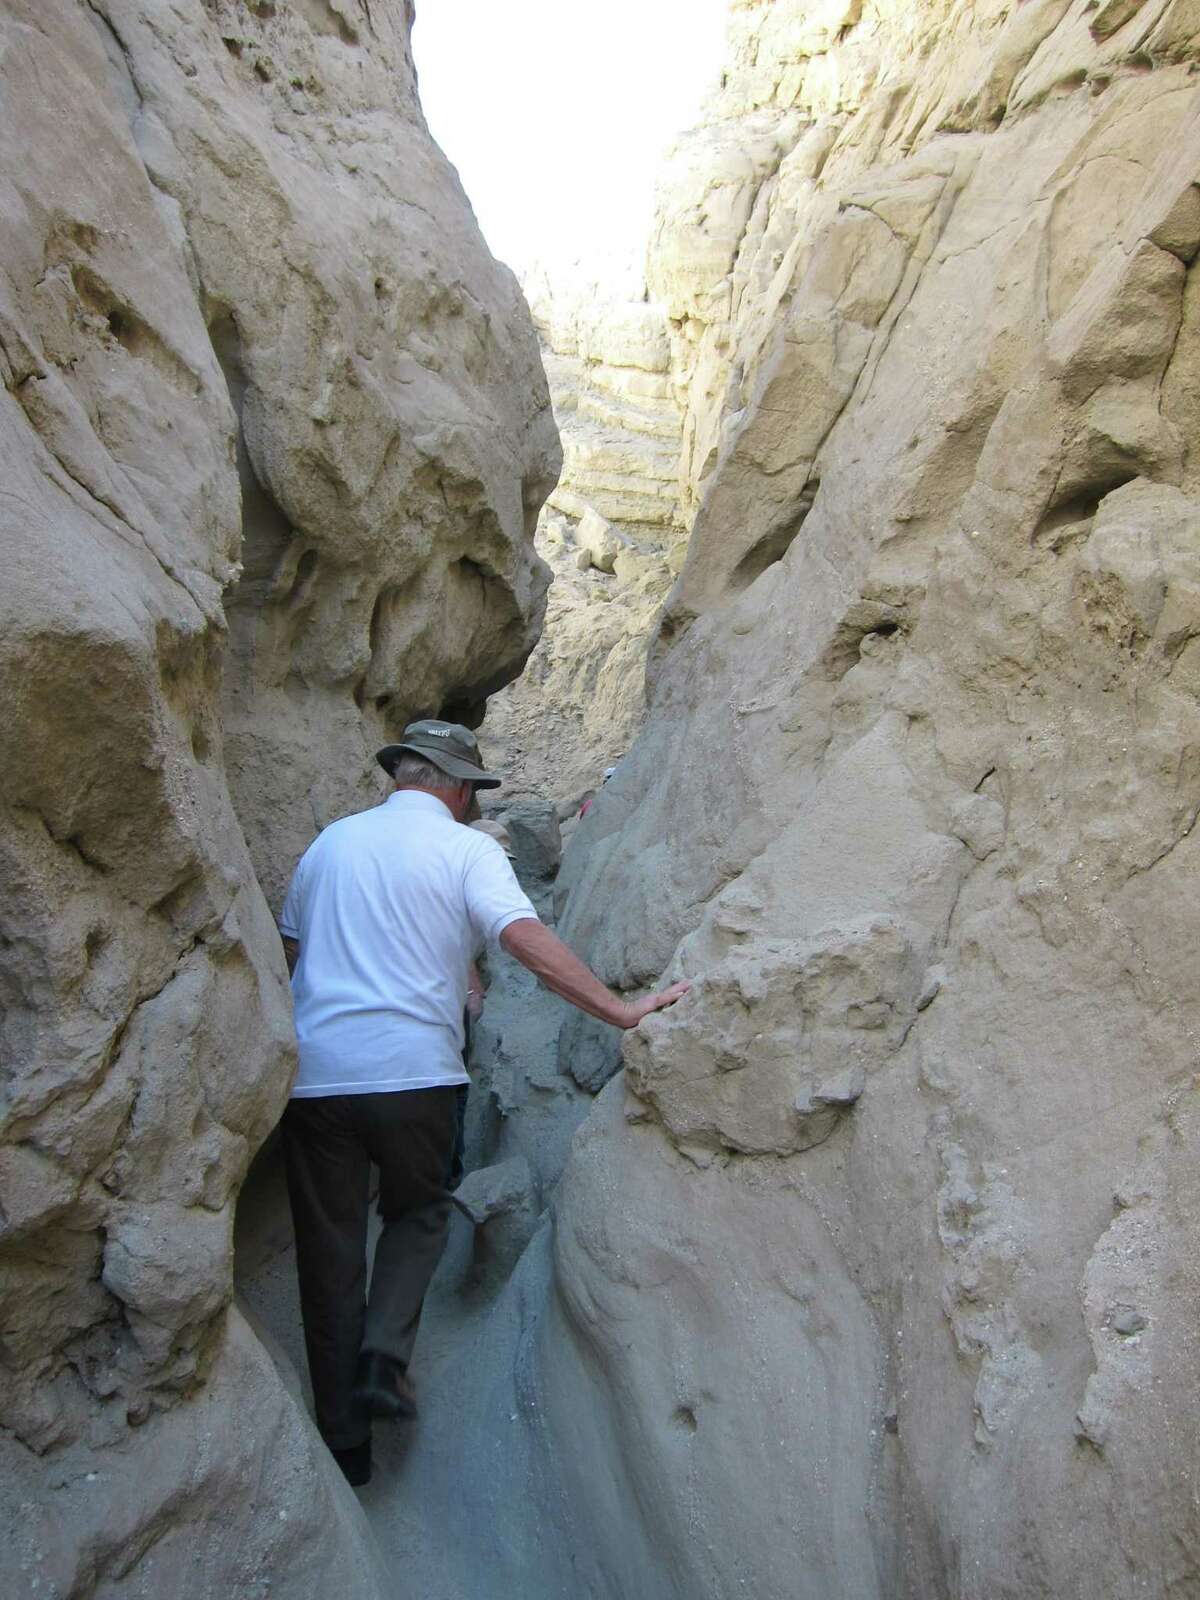 Hike slot canyons as part of a Red Jeep tour or on your own in the Coachella Valley.